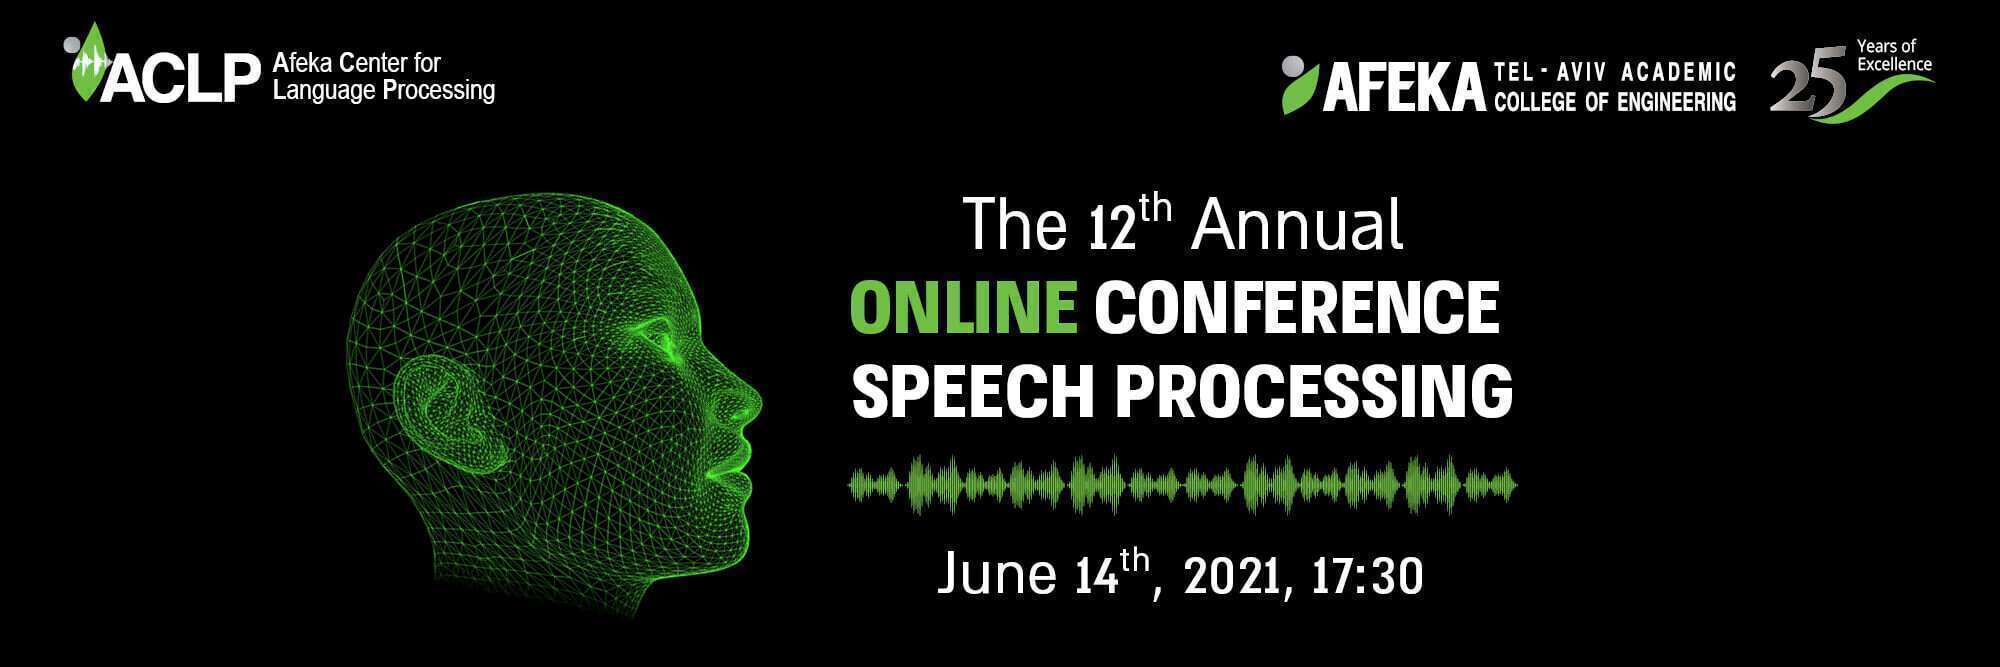 the 12th annual speech processing